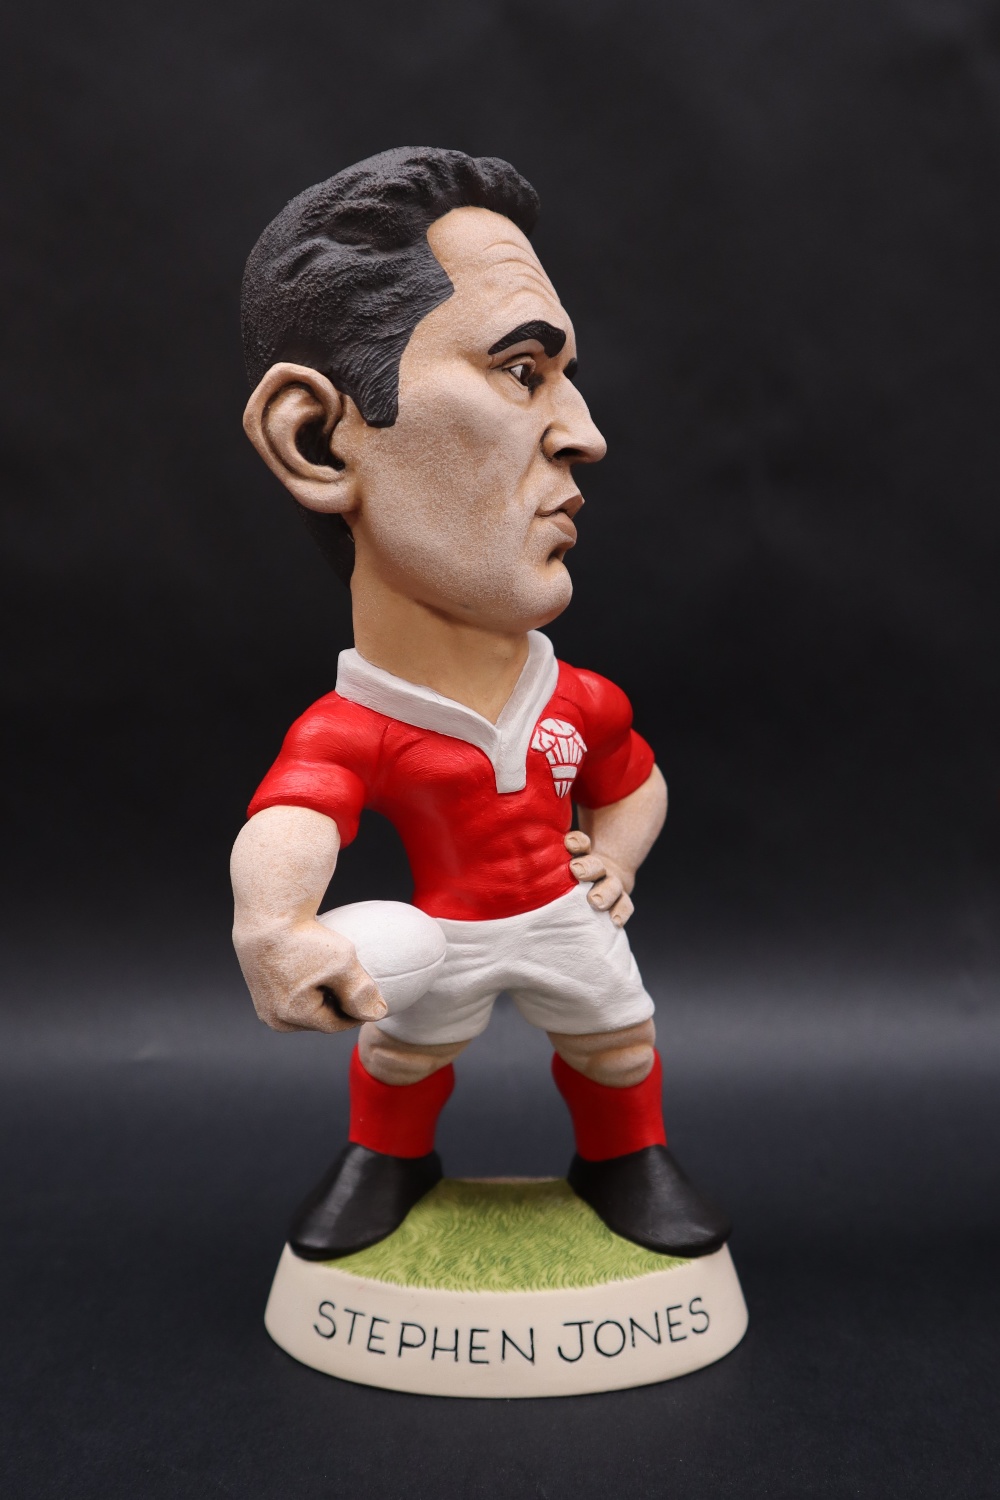 A World of Groggs Limited Edition resin figure of Stephen Jones in Welsh Rugby kit, - Image 2 of 10